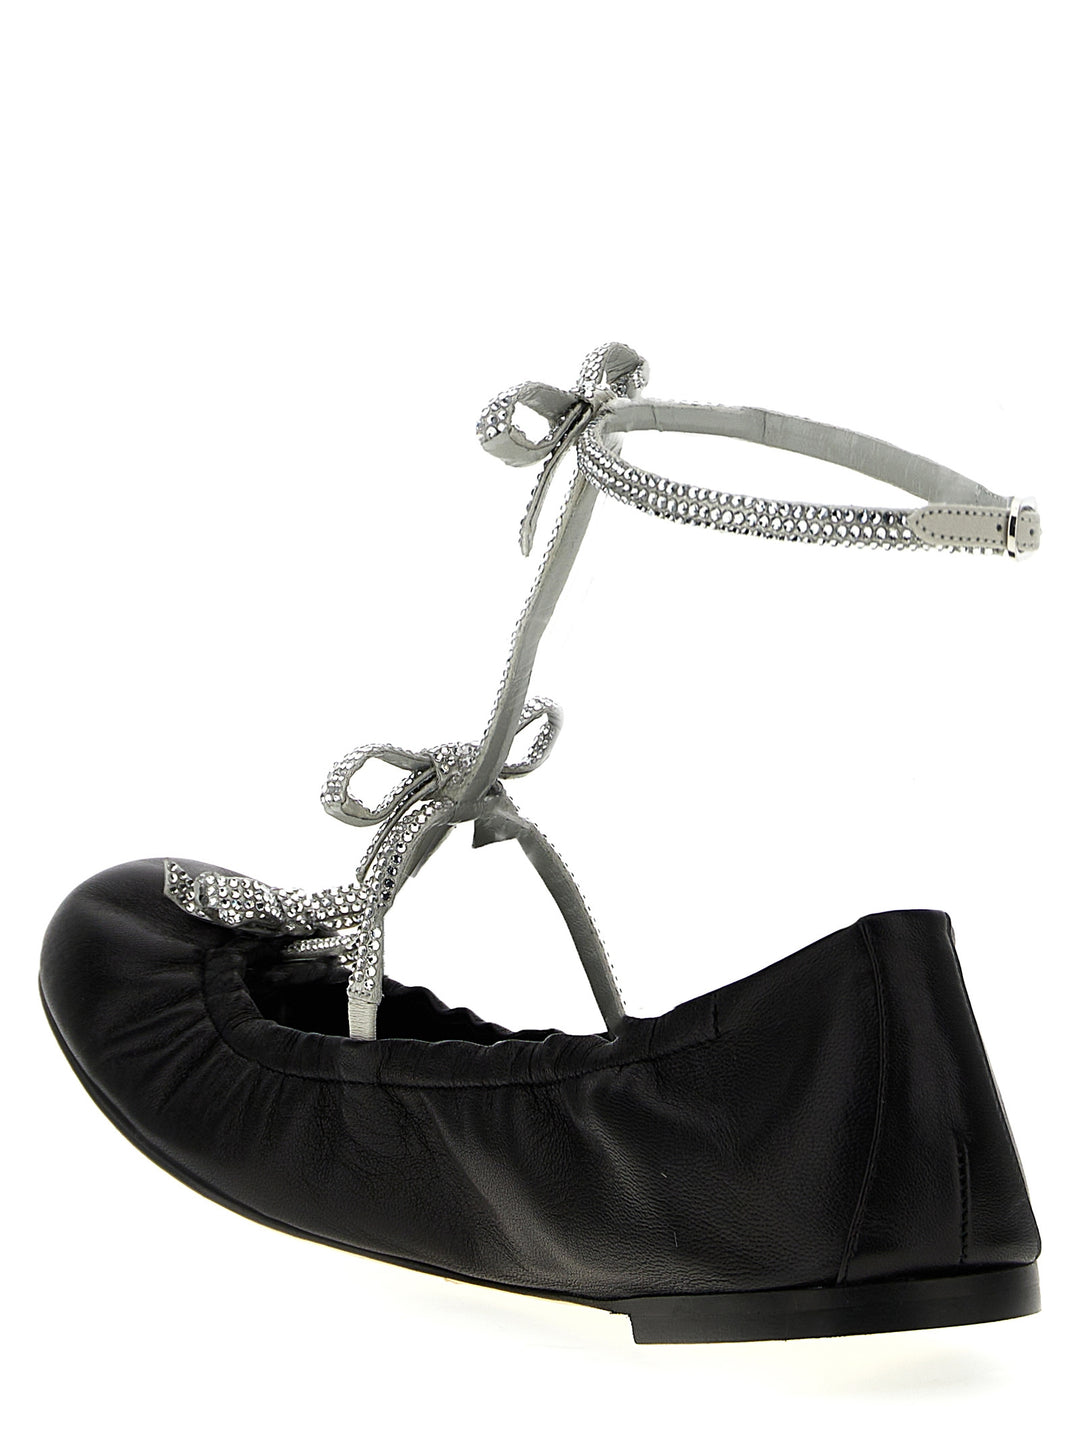 Caterina Flat Shoes Nero